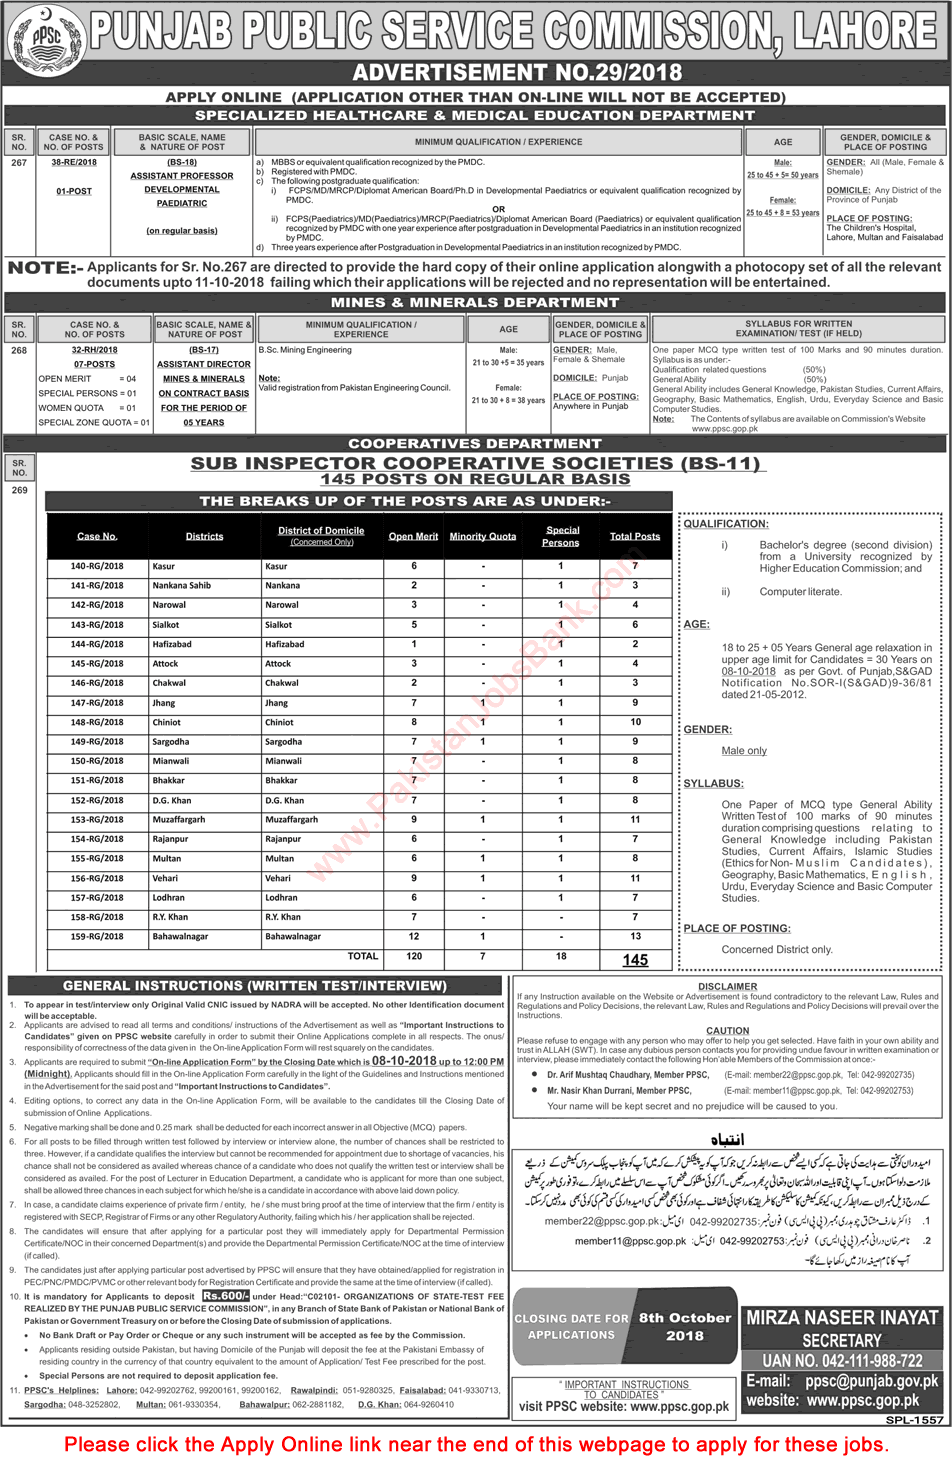 PPSC Jobs September 2018 Apply Online Consolidated Advertisement No 29/2018 Latest